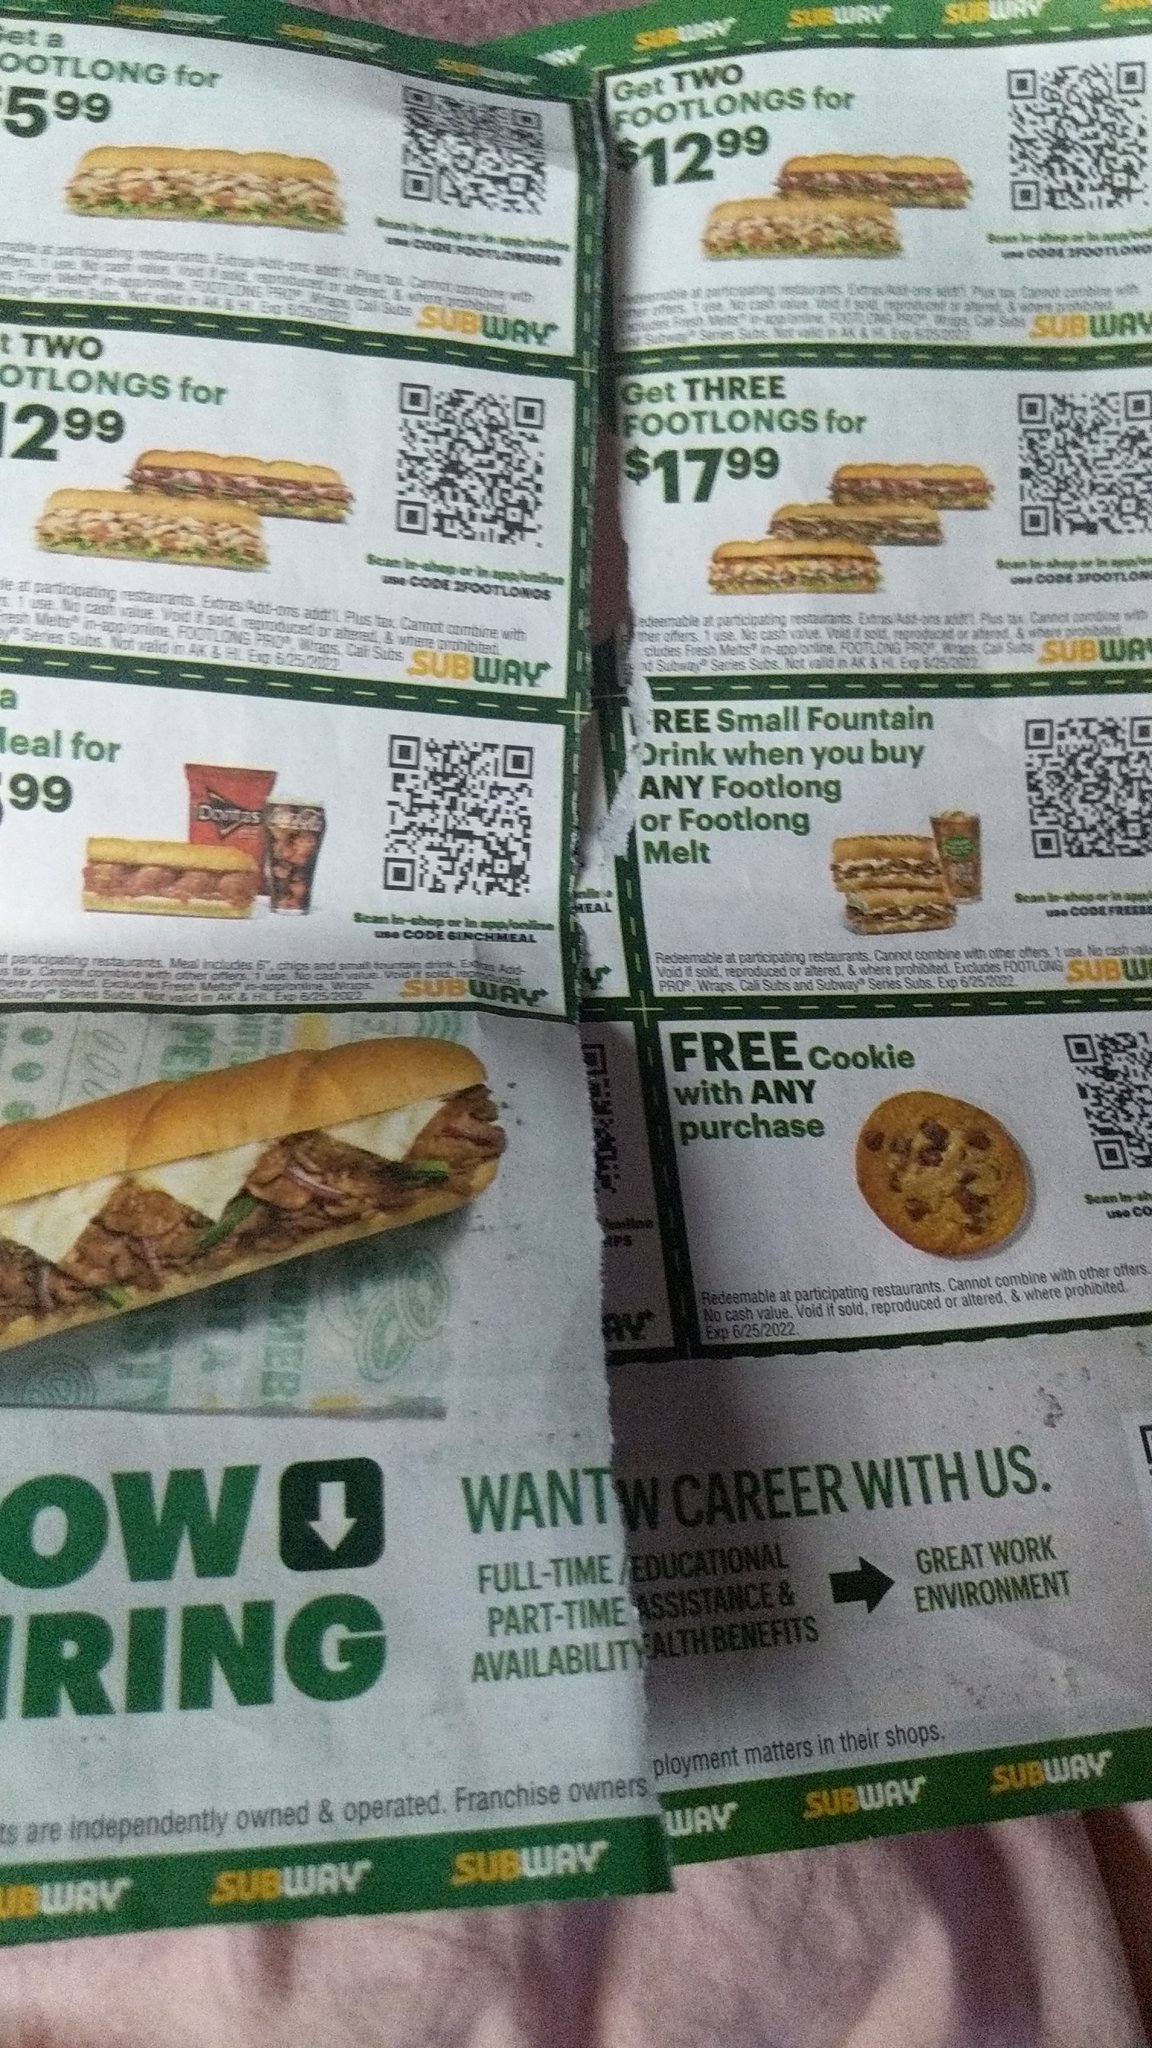 on twitter subway subway some full on bs sending coupons that none of the subways accept https t co gxnz4pknmz twitter